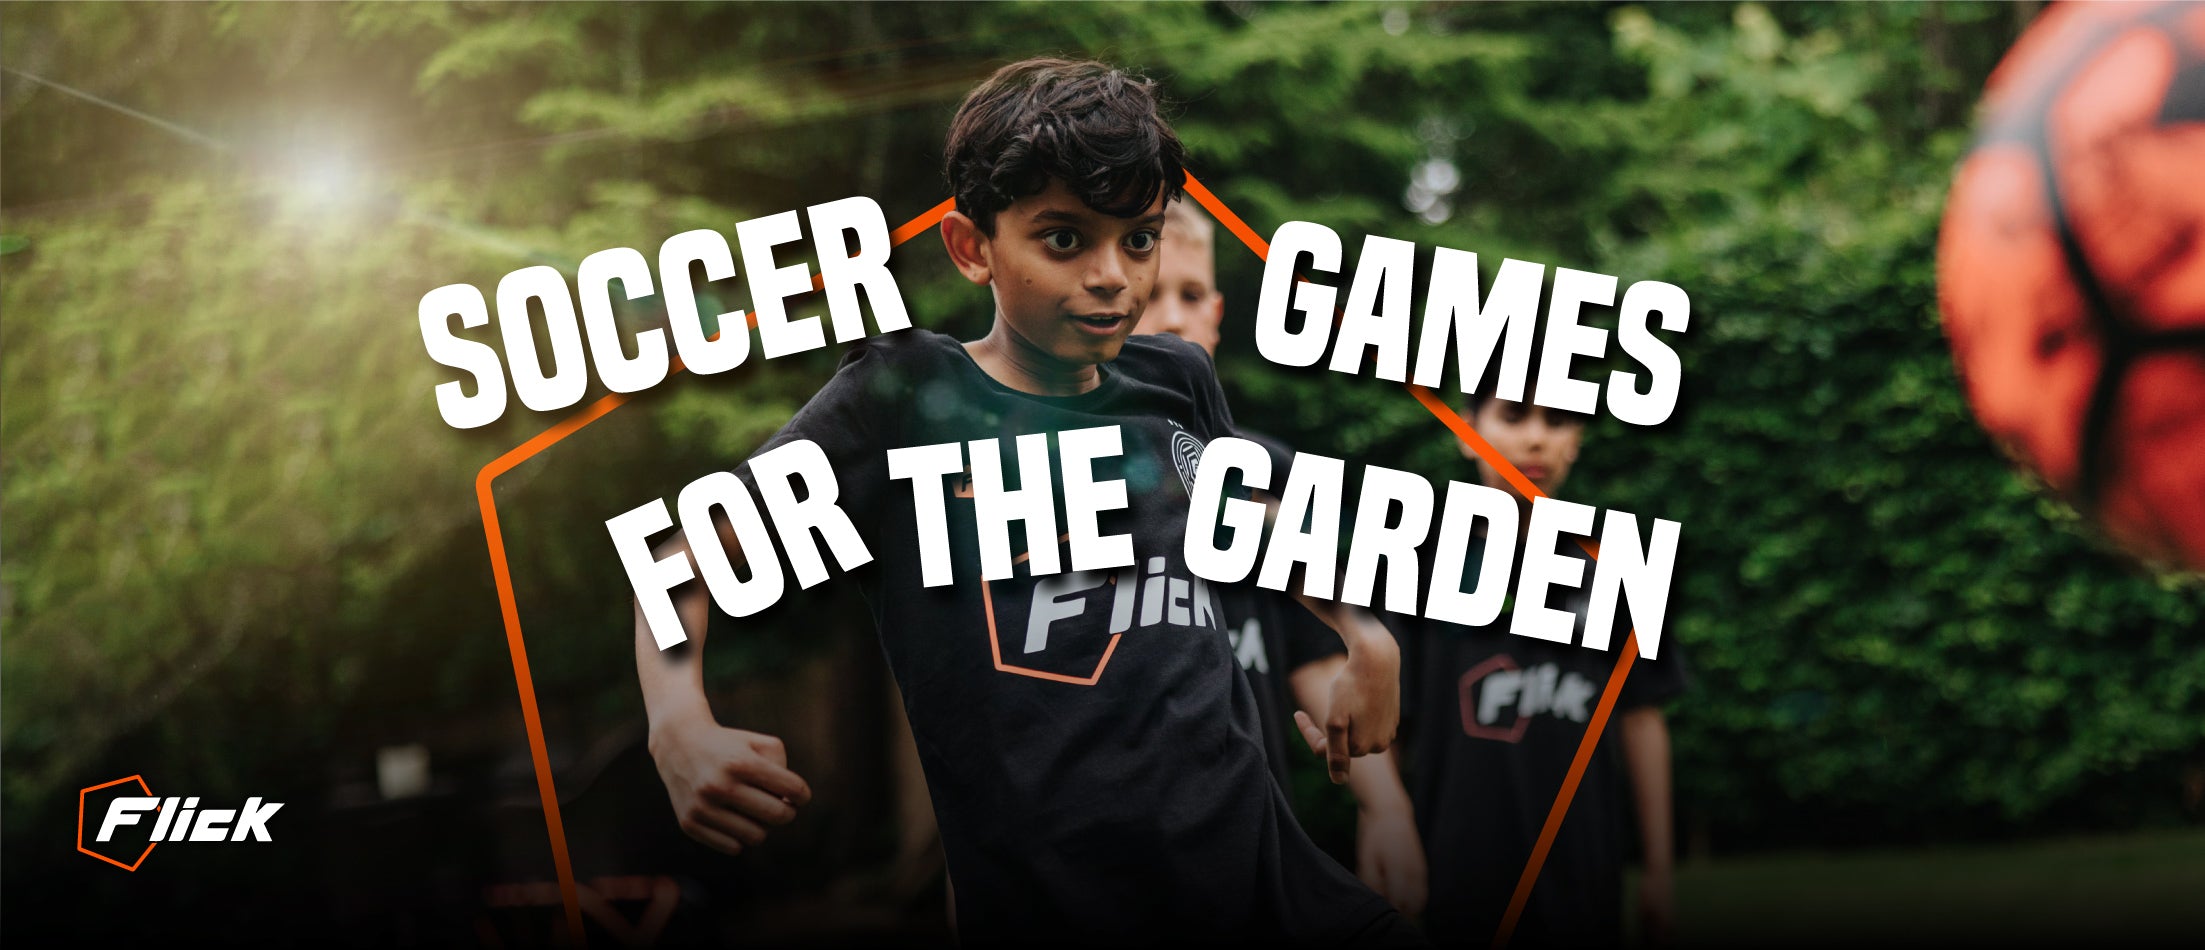 7 Soccer games to play outside in the garden